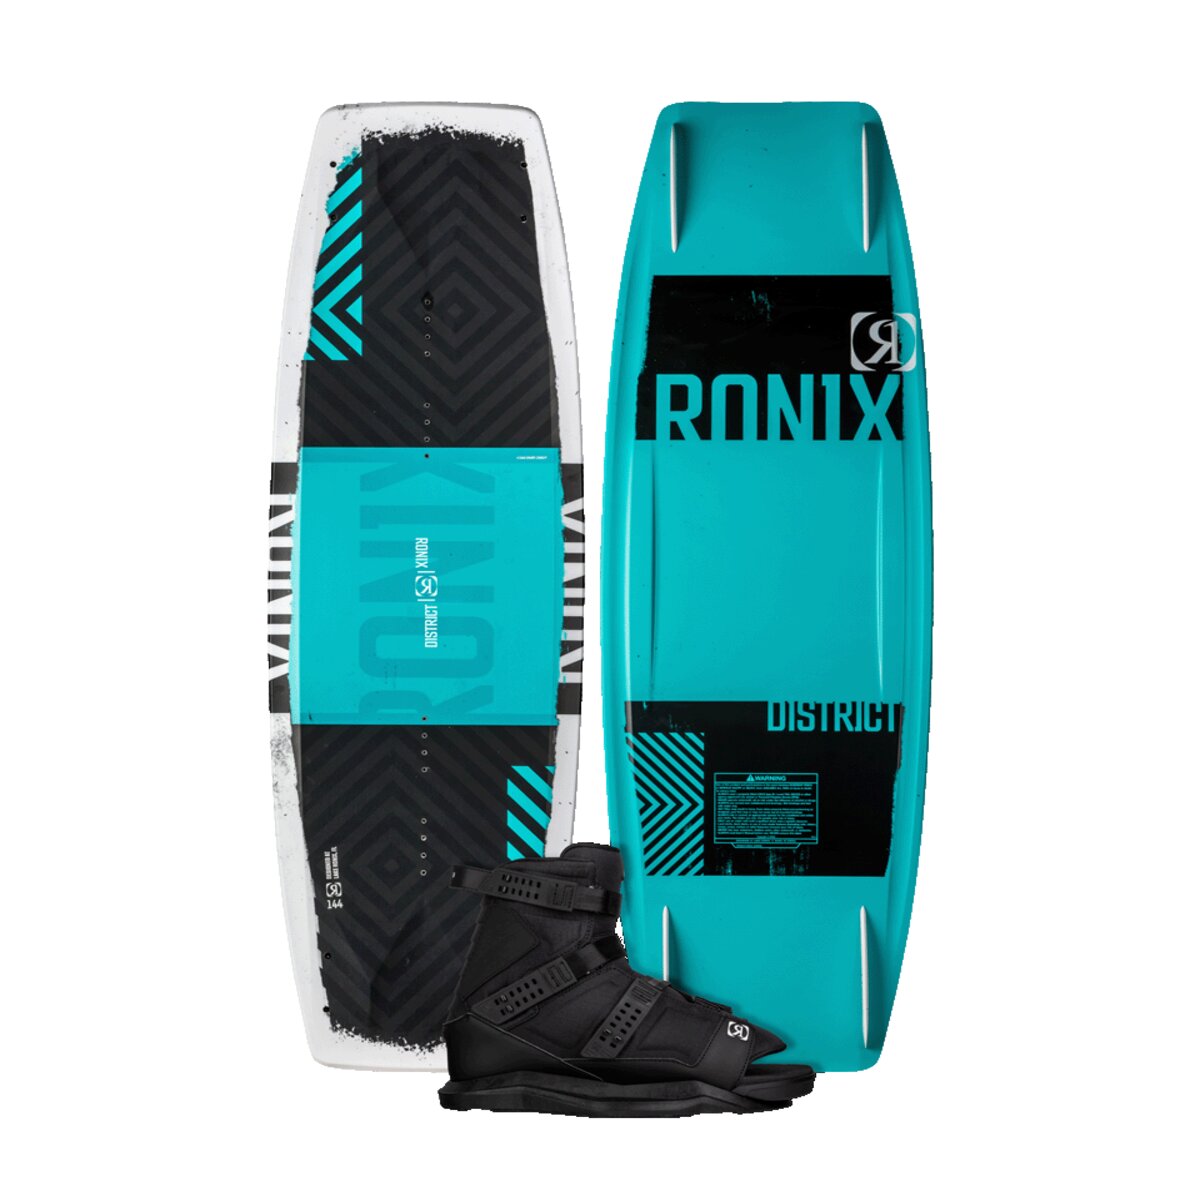 wakeboarding - wakeboss - Ronix District